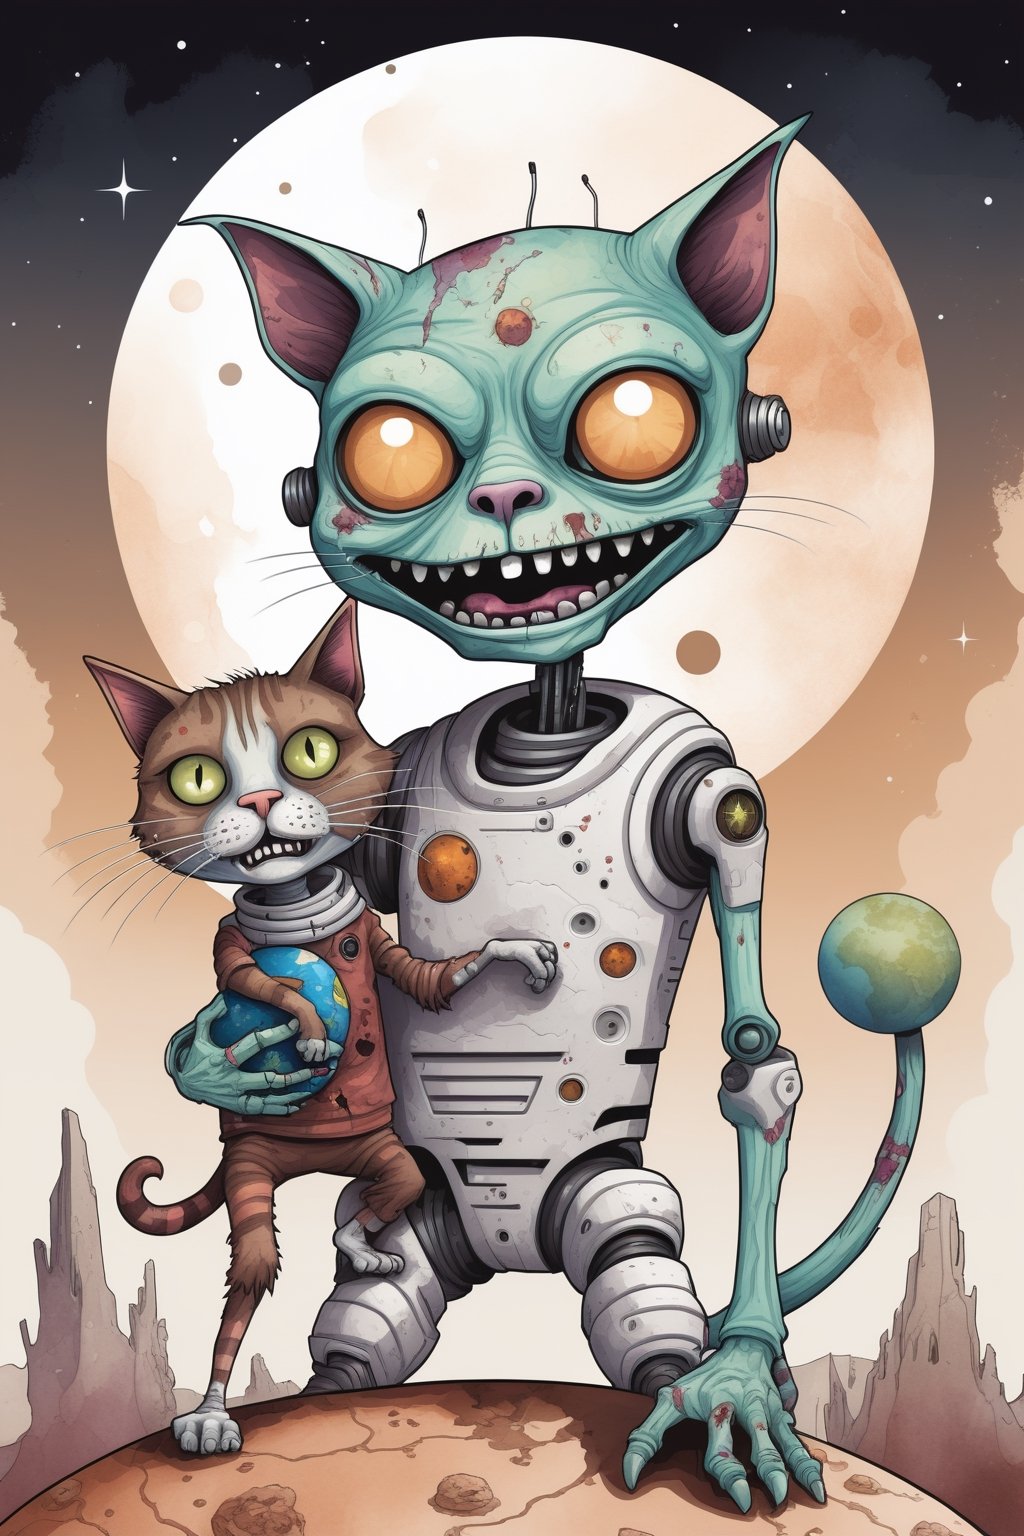 Humorous sci-fi vector illustration featuring a zombie cyborg with a grinning expression, holding a comical zombie cat. They stand on a planet inhabited by various creatures. The art style incorporates watercolor textures with Cedar Brown and White color palette. The overall design is suitable for a poster or art print.